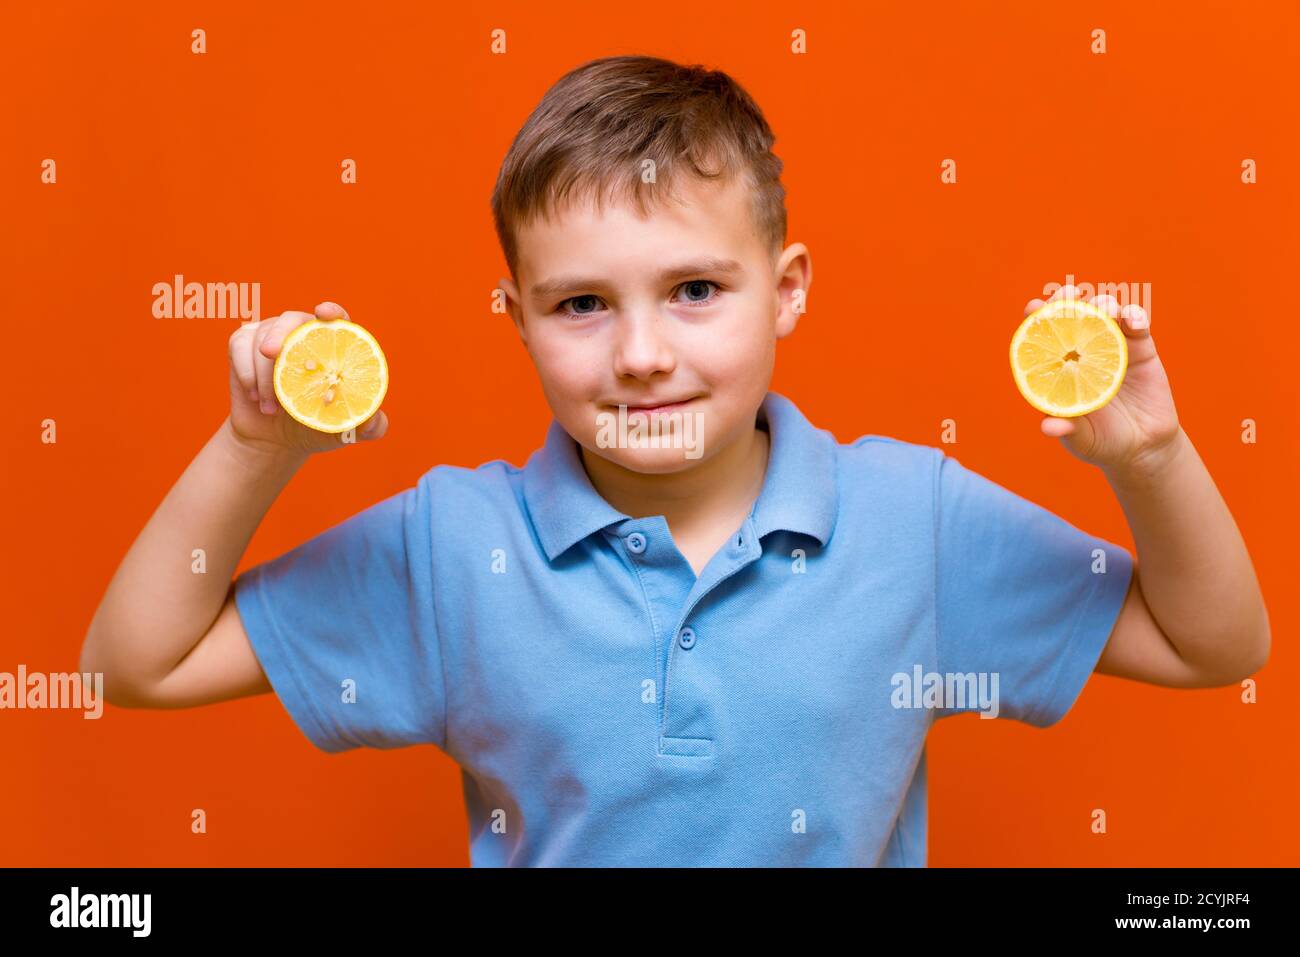 Close up Caucasian young child shows raw slices of lemon on a orange background. Healthy, lifestyle and a happy childhood concept. Stock Photo